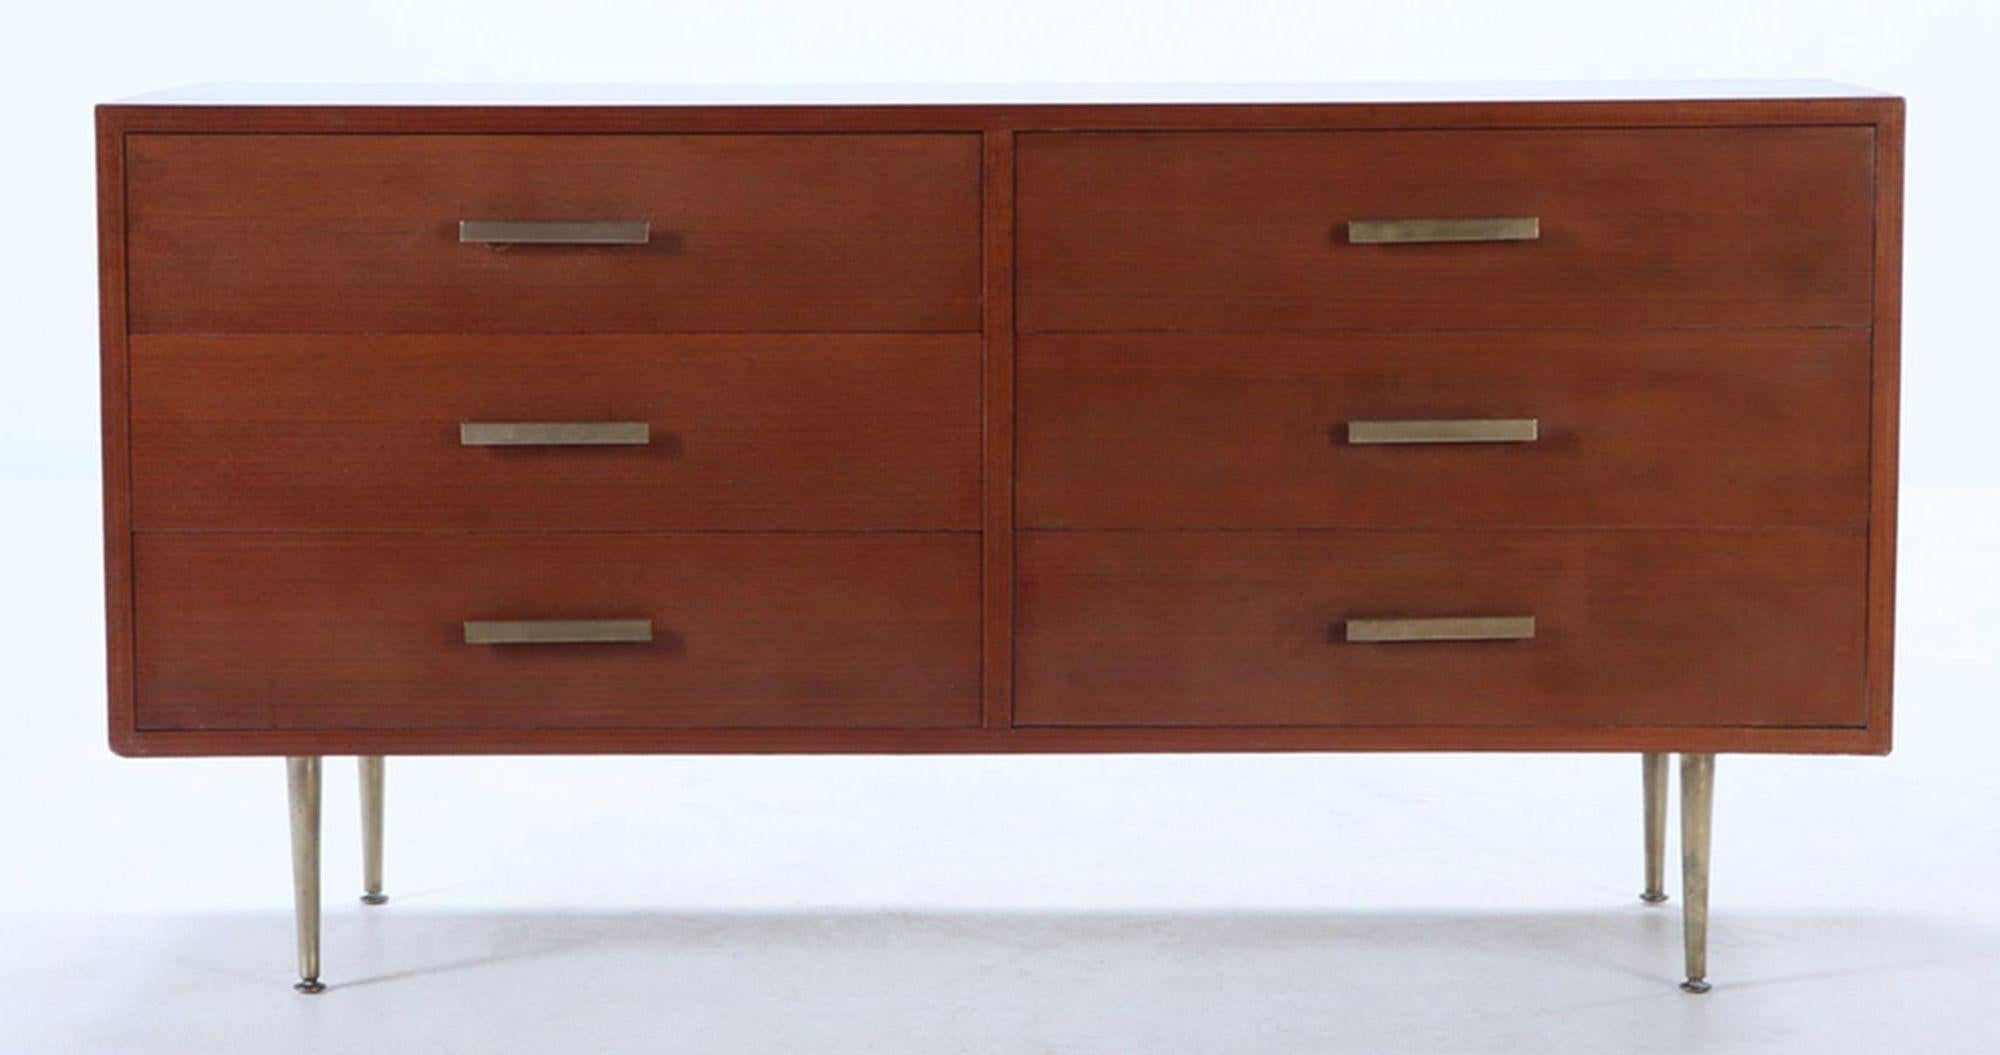 Vintage Mid-Century dresser made with rich wood showcasing the natural grain and warm tones that define the Mid-Century style, and also includes bronze legs and handles. The piece includes six spacious drawers. Elevating this piece are its